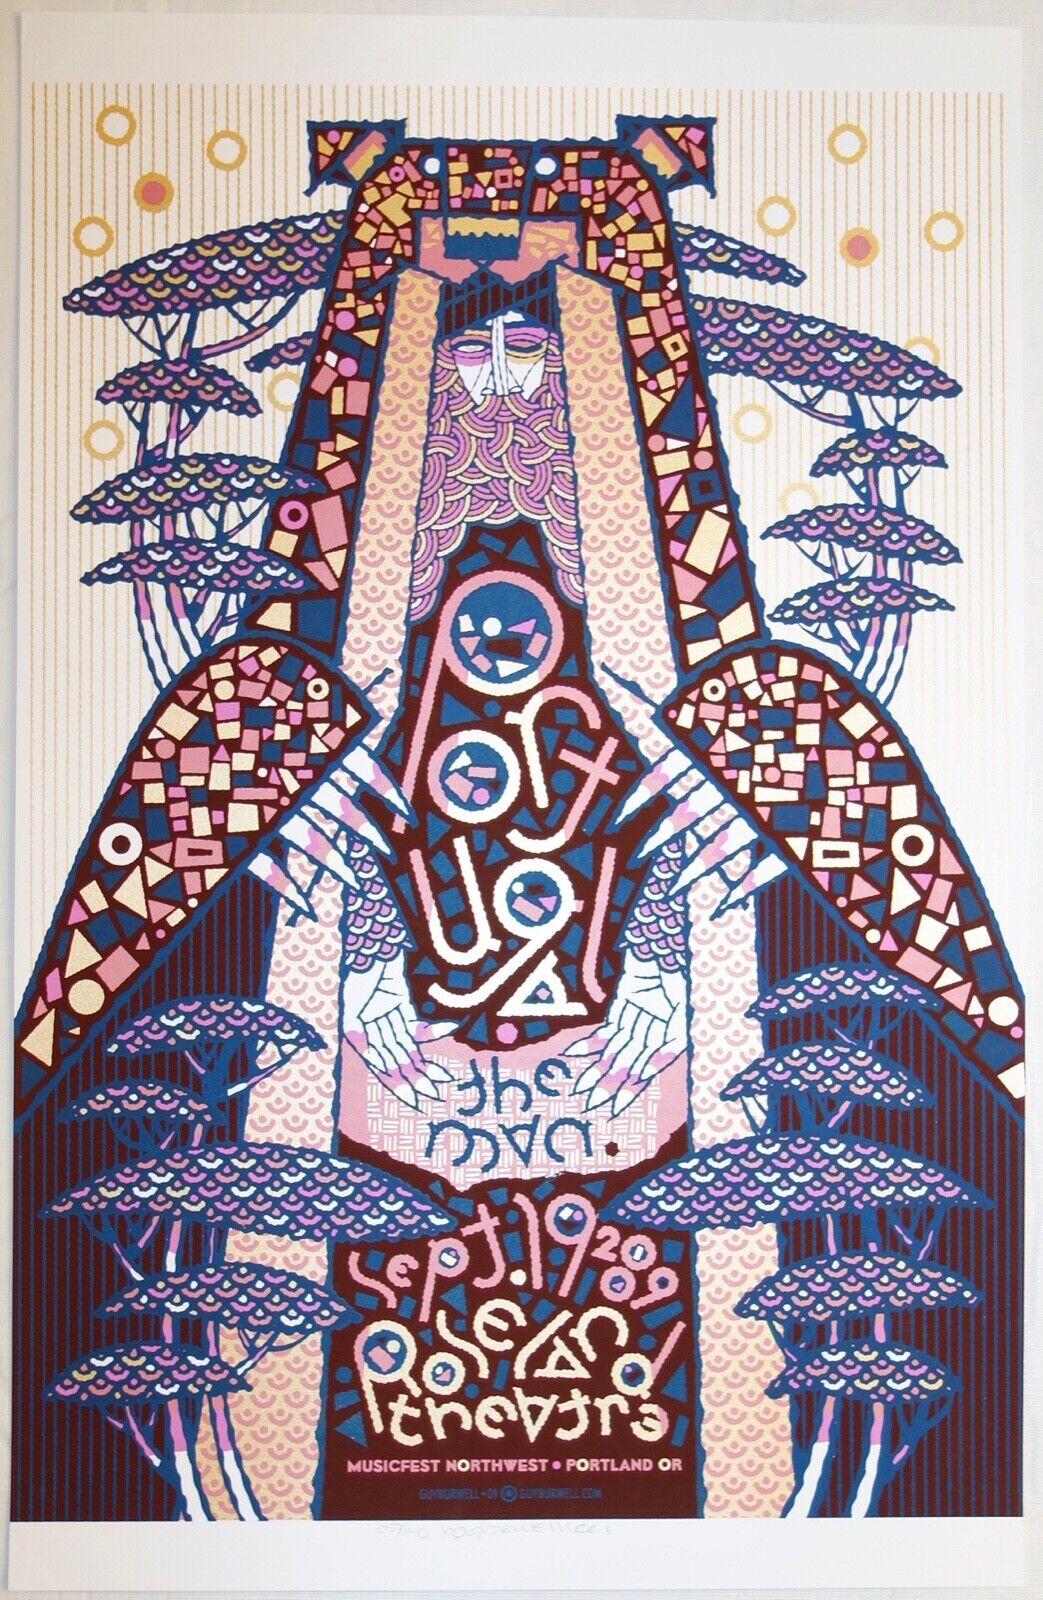 2009 Portugal the Man - Portland Silkscreen Concert Poster by Guy Burwell s/n